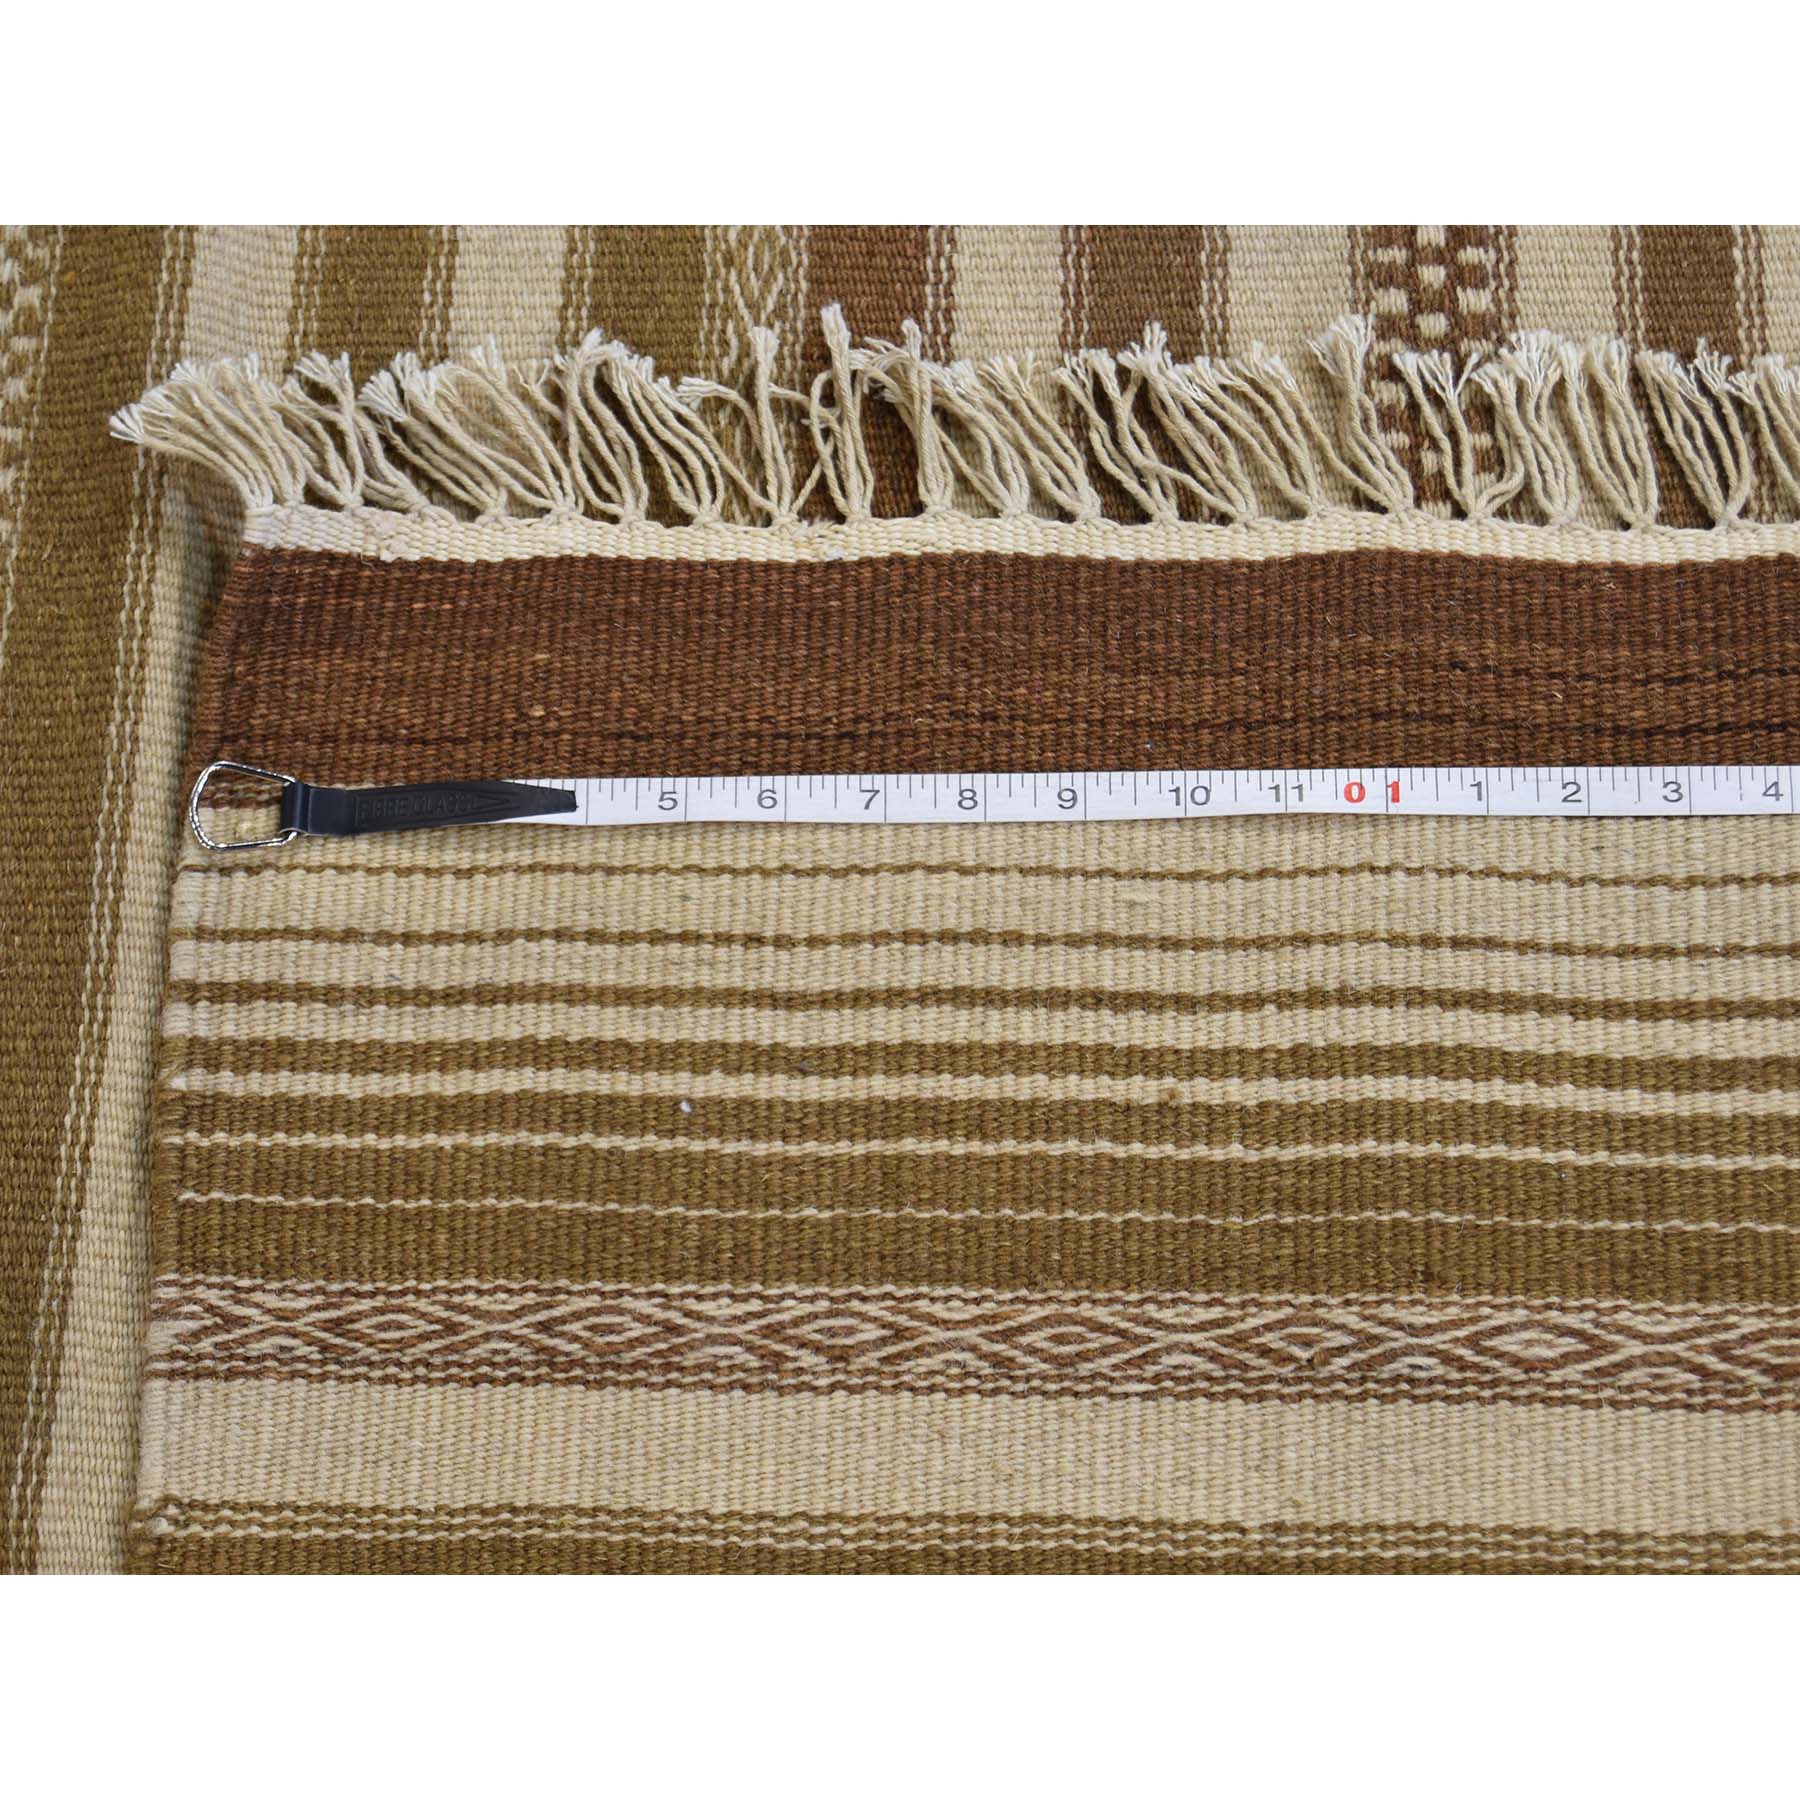 2-10--x4-10-- Striped Durie Kilim Hand Woven Flat Weave Reversible Rug 